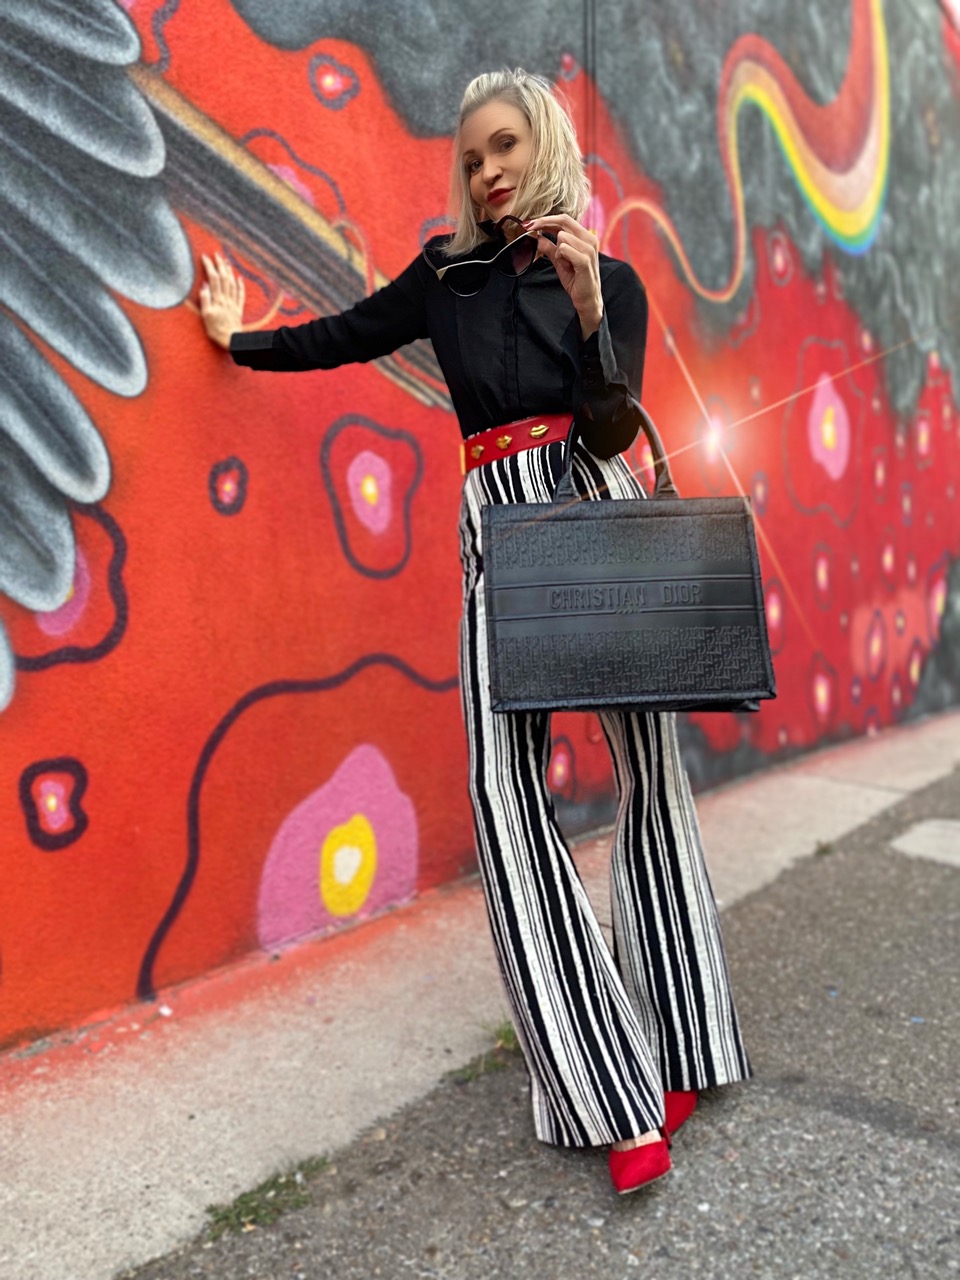 Lifestyle Influencer, Jamie Lewinger of More Than Turquoise, carryin dior dupe tote bag from Fashions Outlet Supply